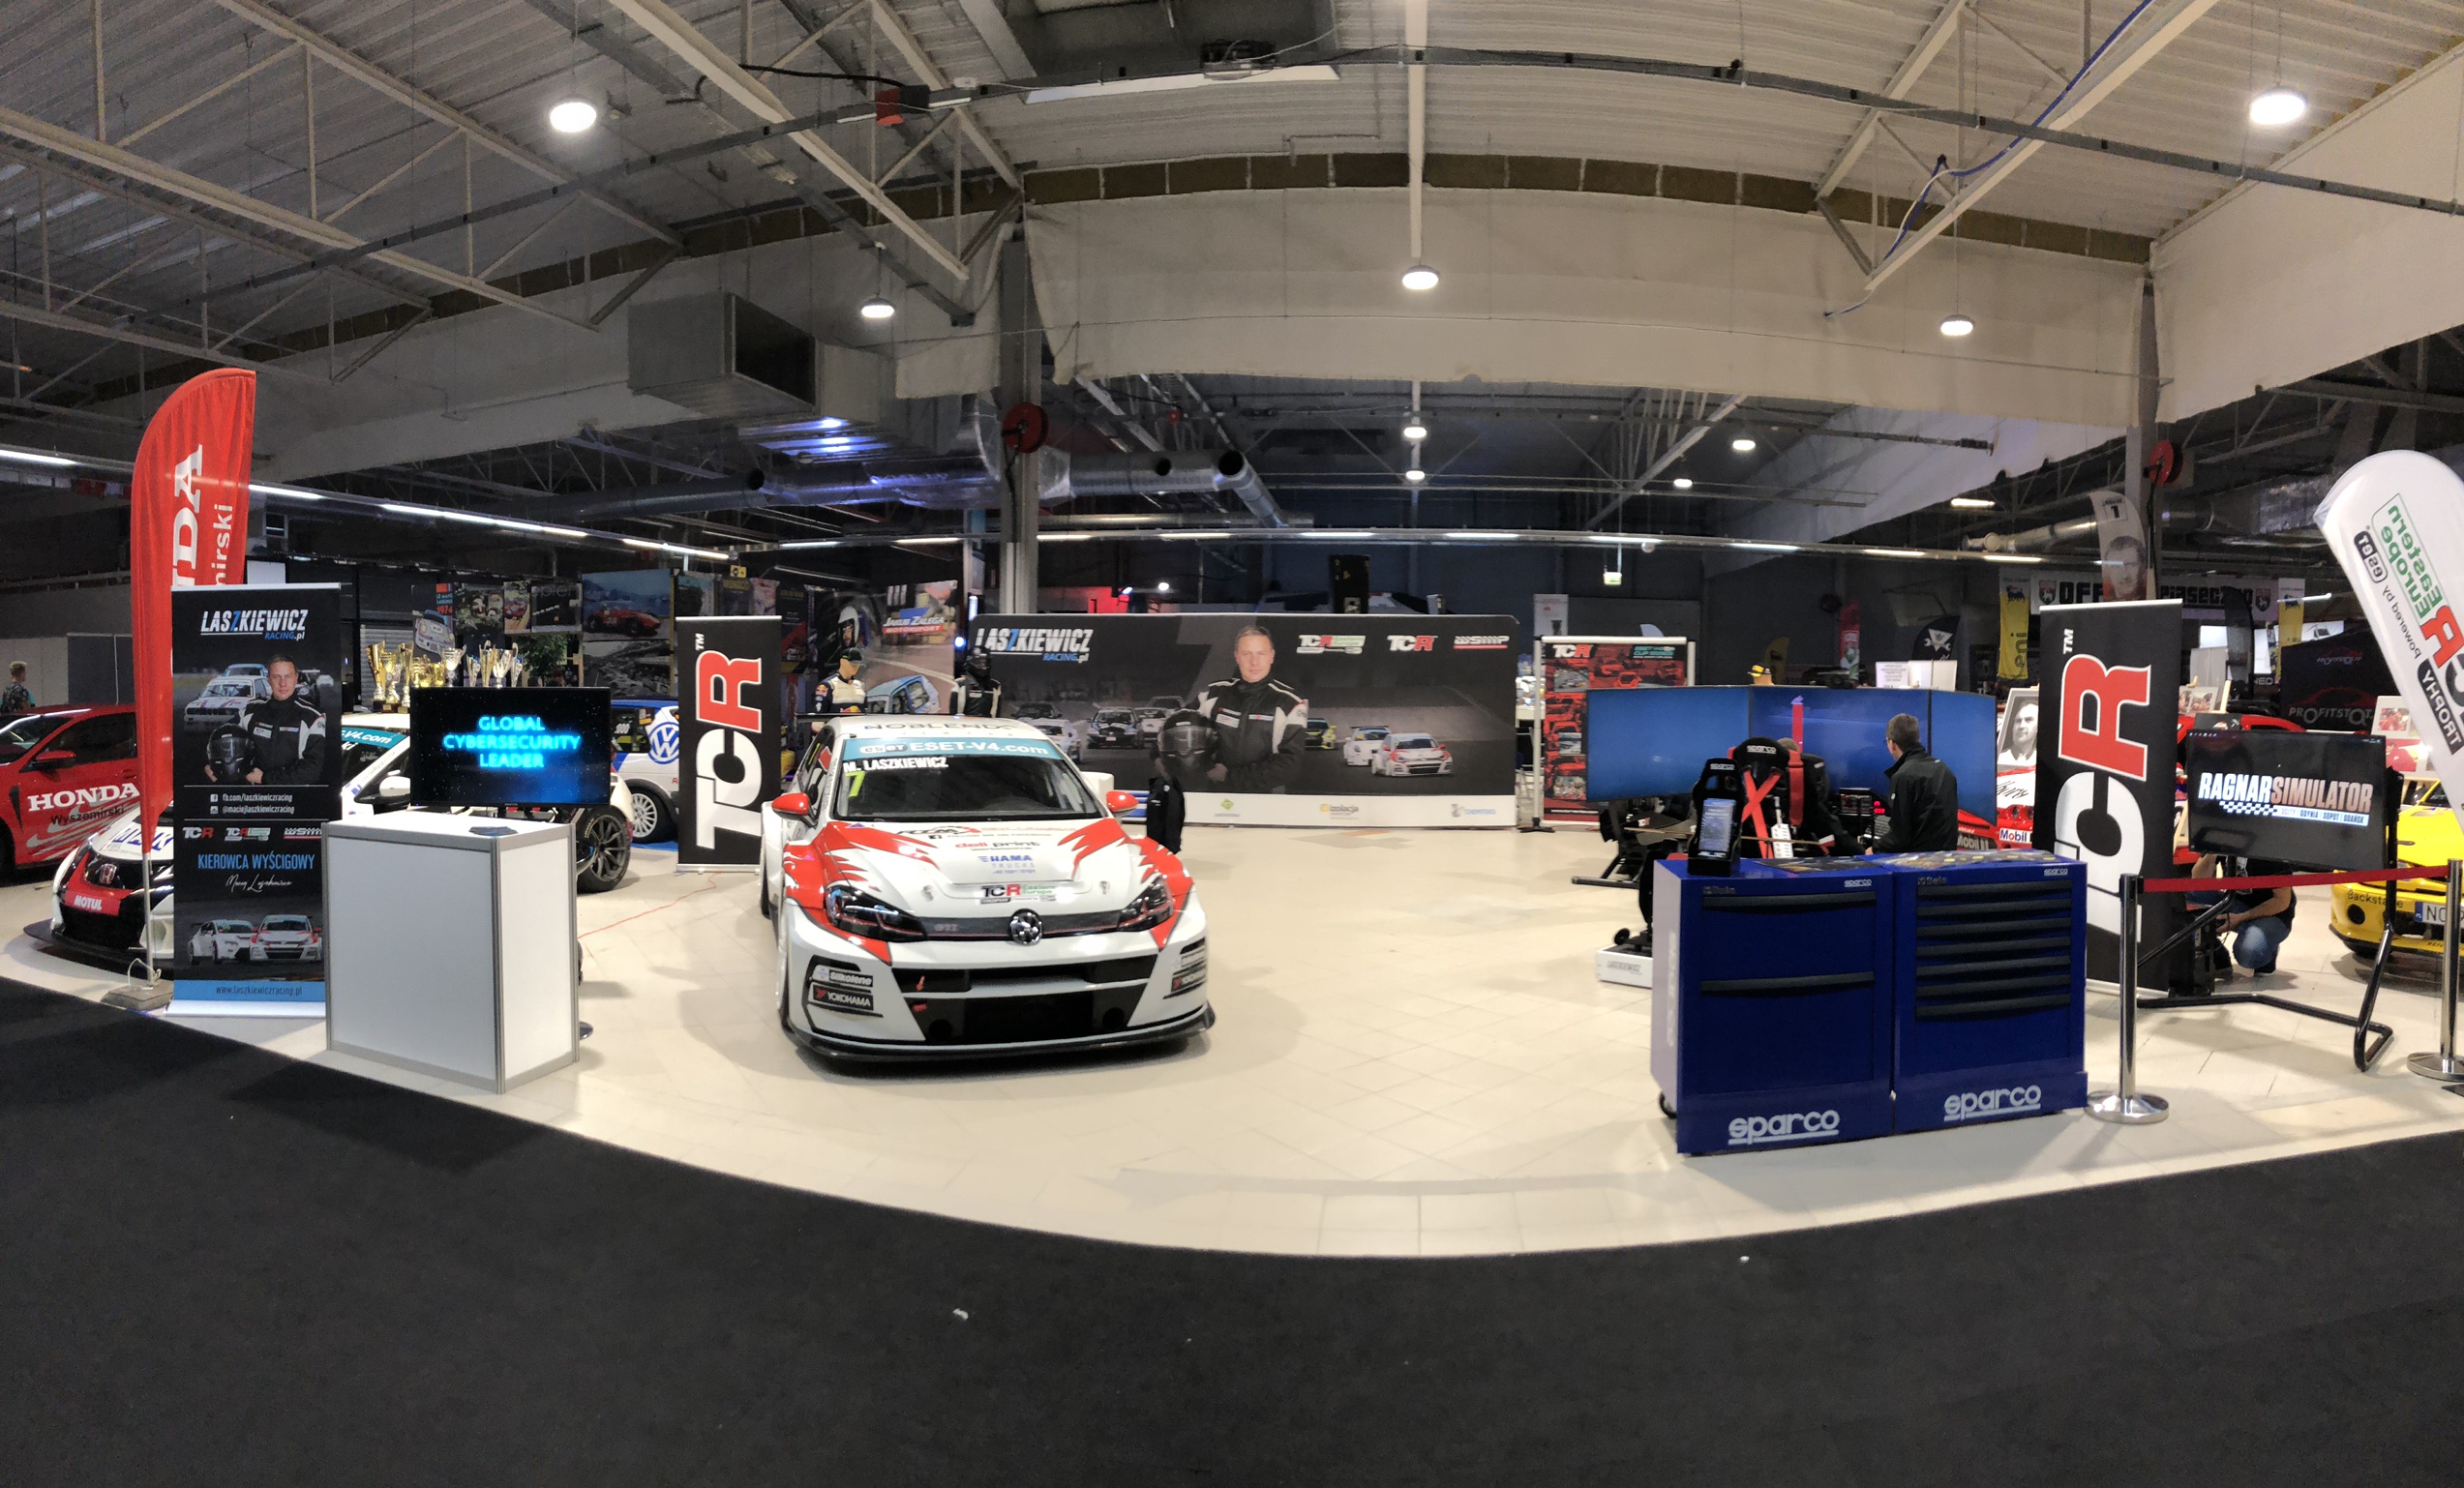 ESET V4 Cup cars to appear at Racing Expo in Prague